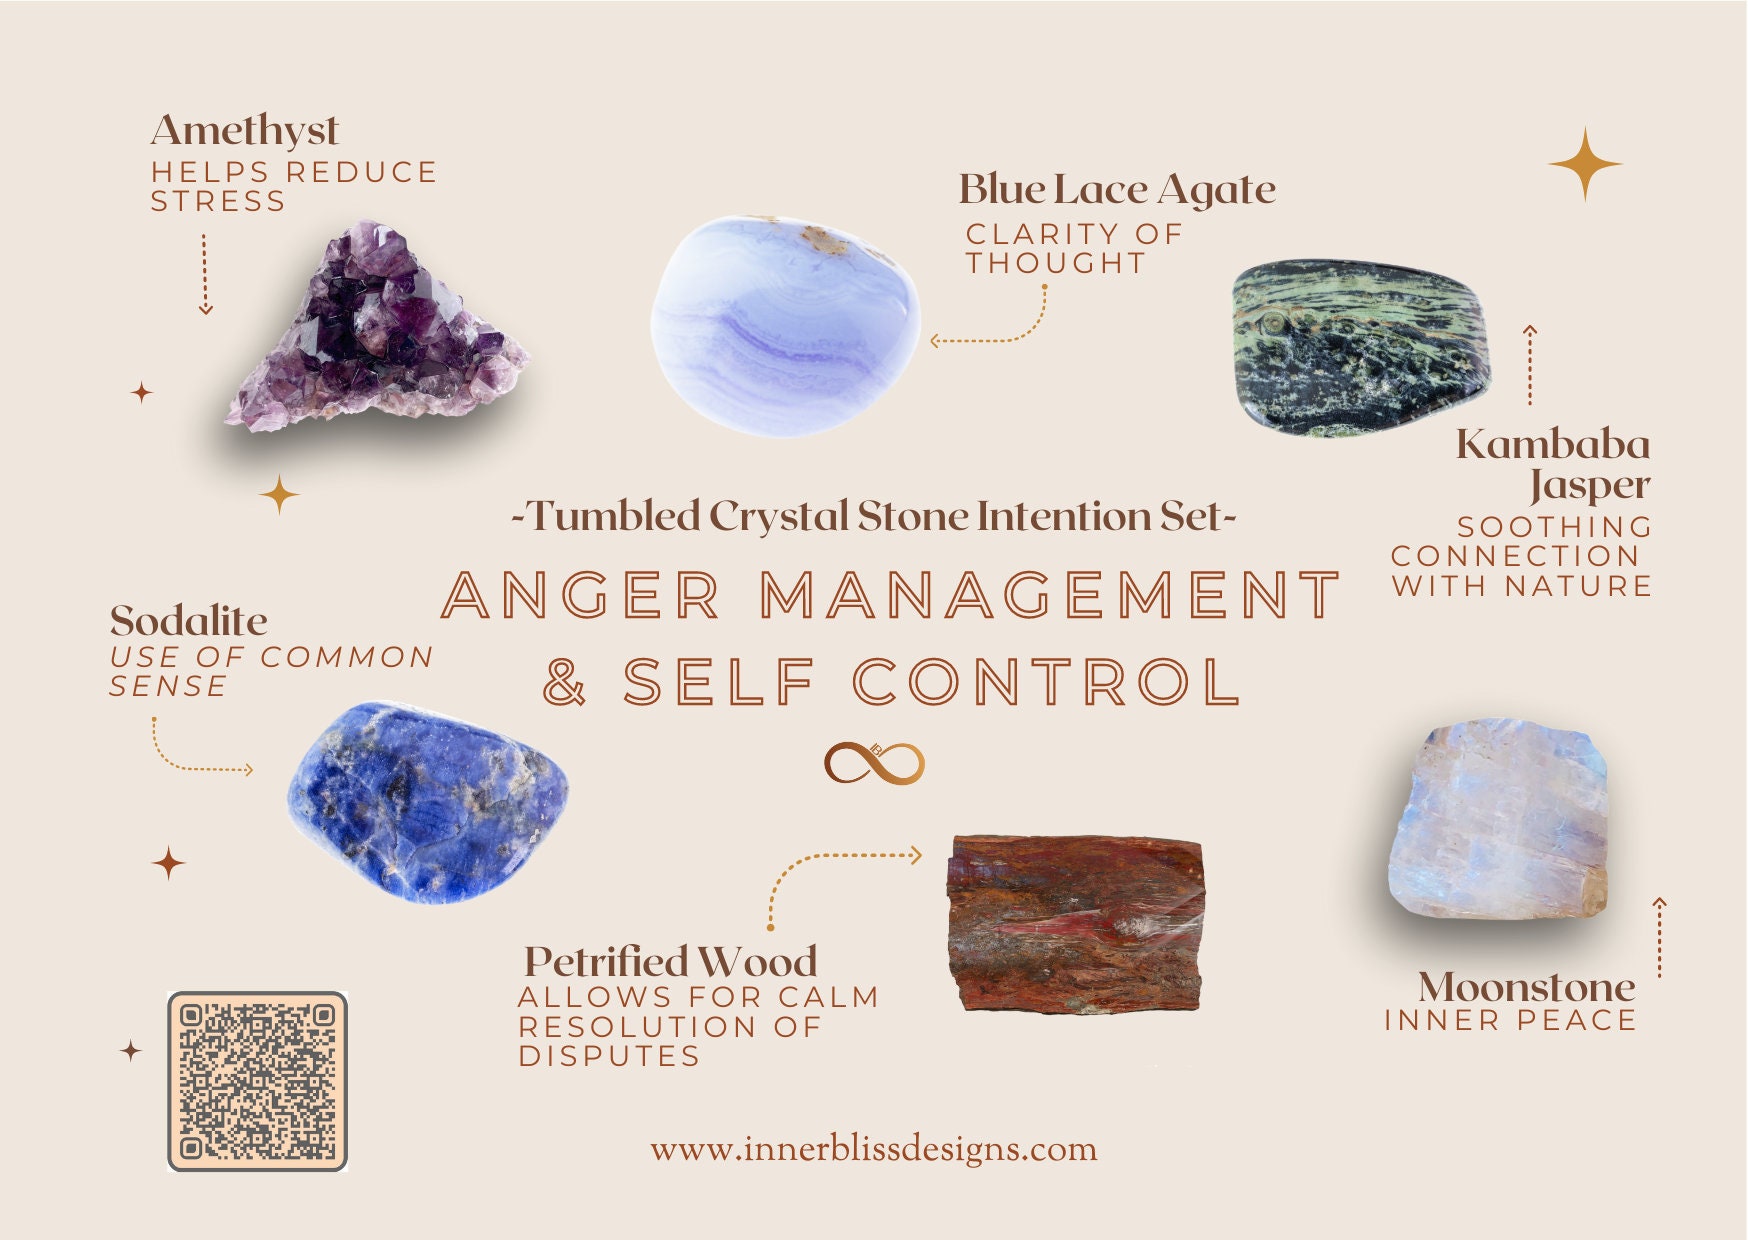 Keep Calm and Use Natural Stones